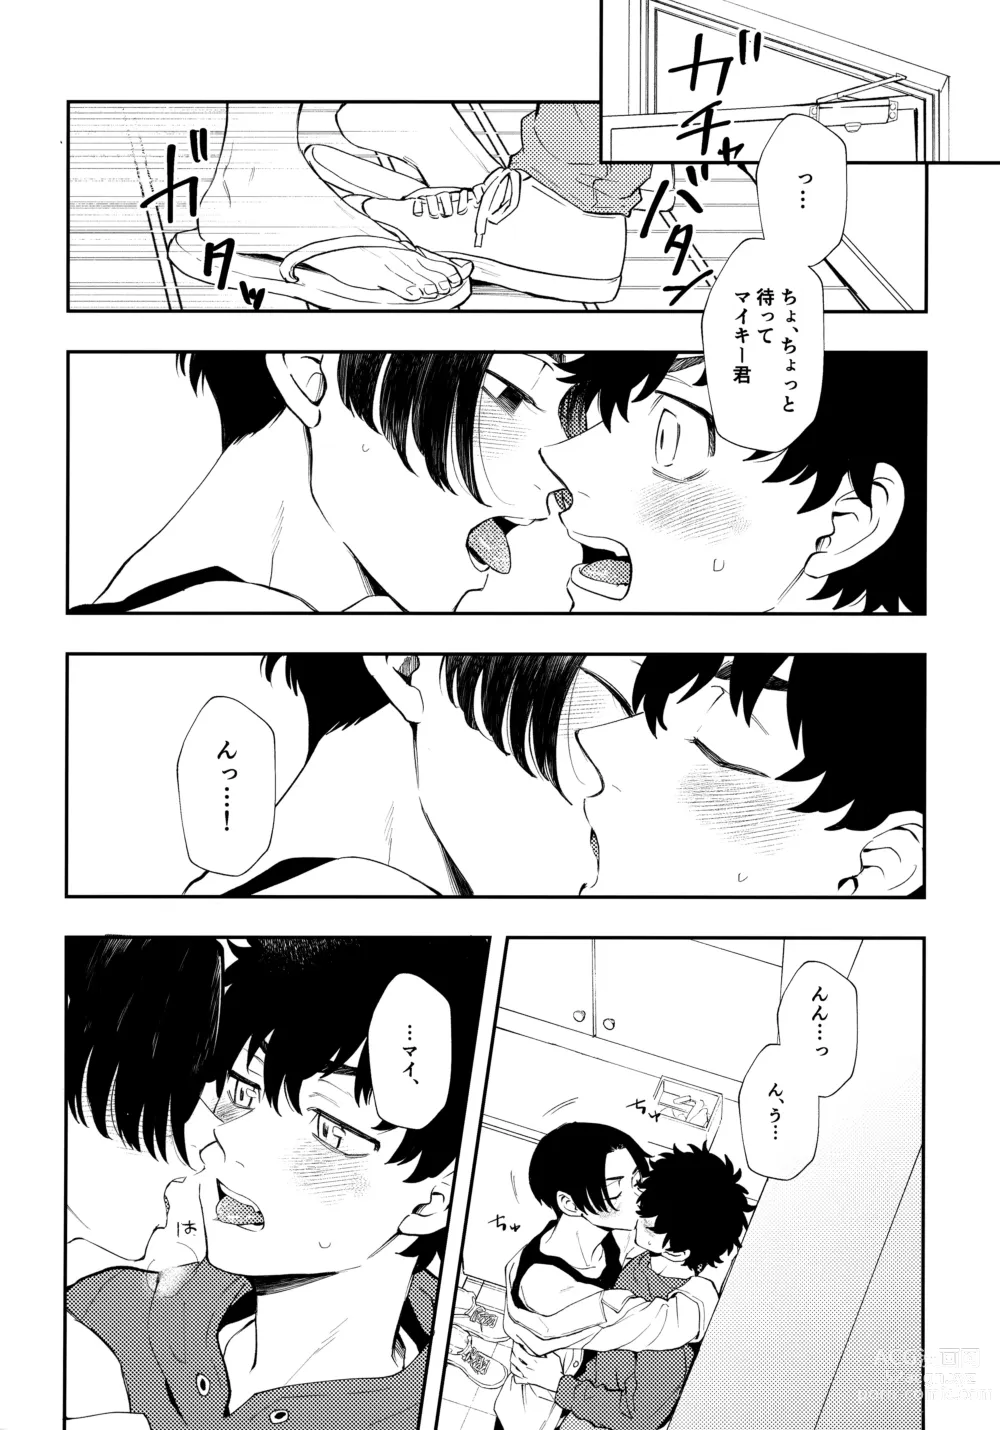 Page 19 of doujinshi Count 5